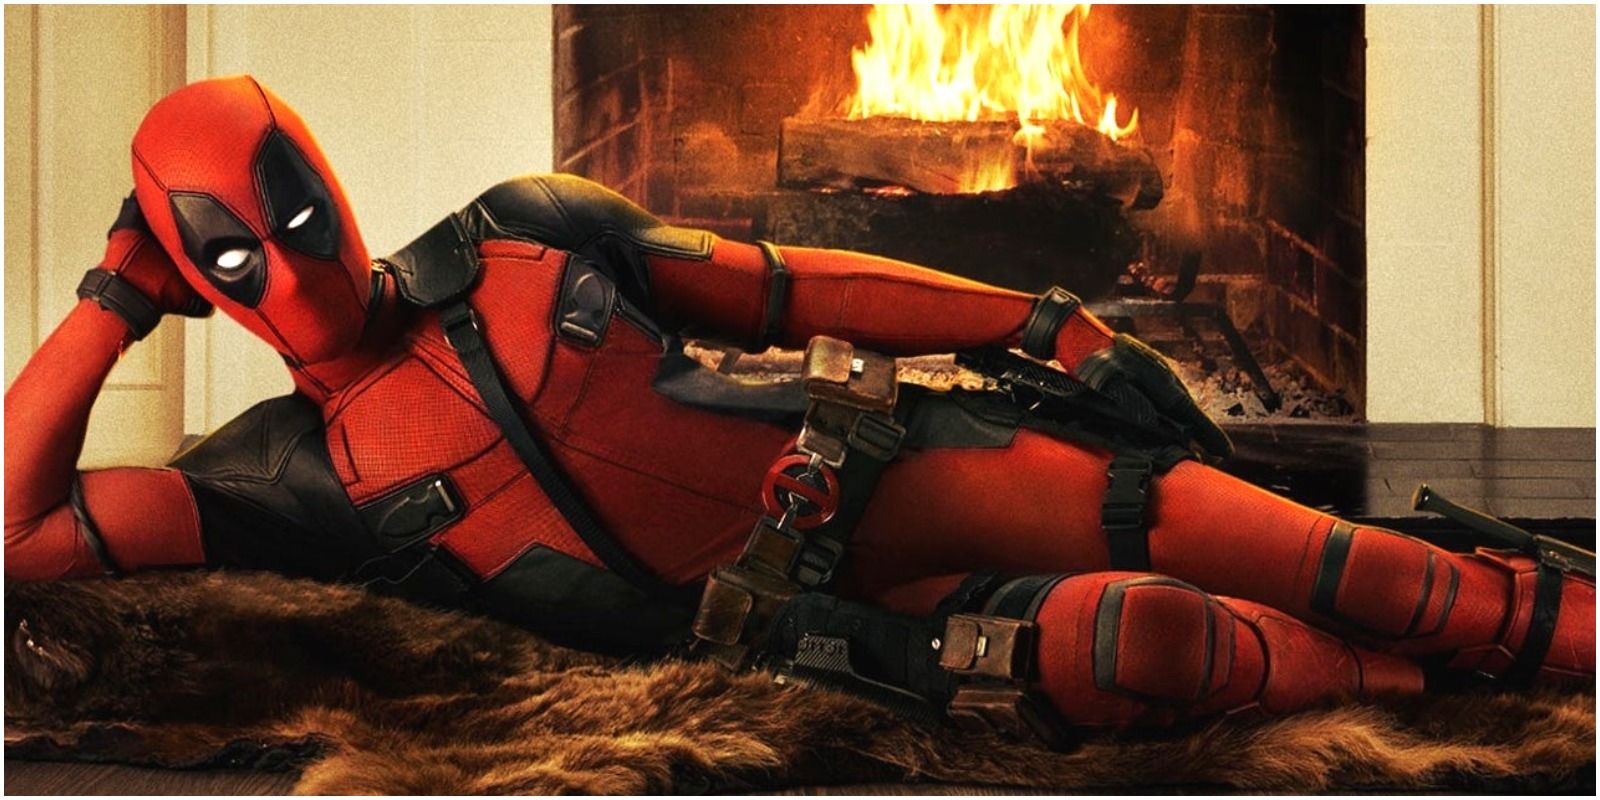 Deadpool lying seductively by the fire from first Deadpool film